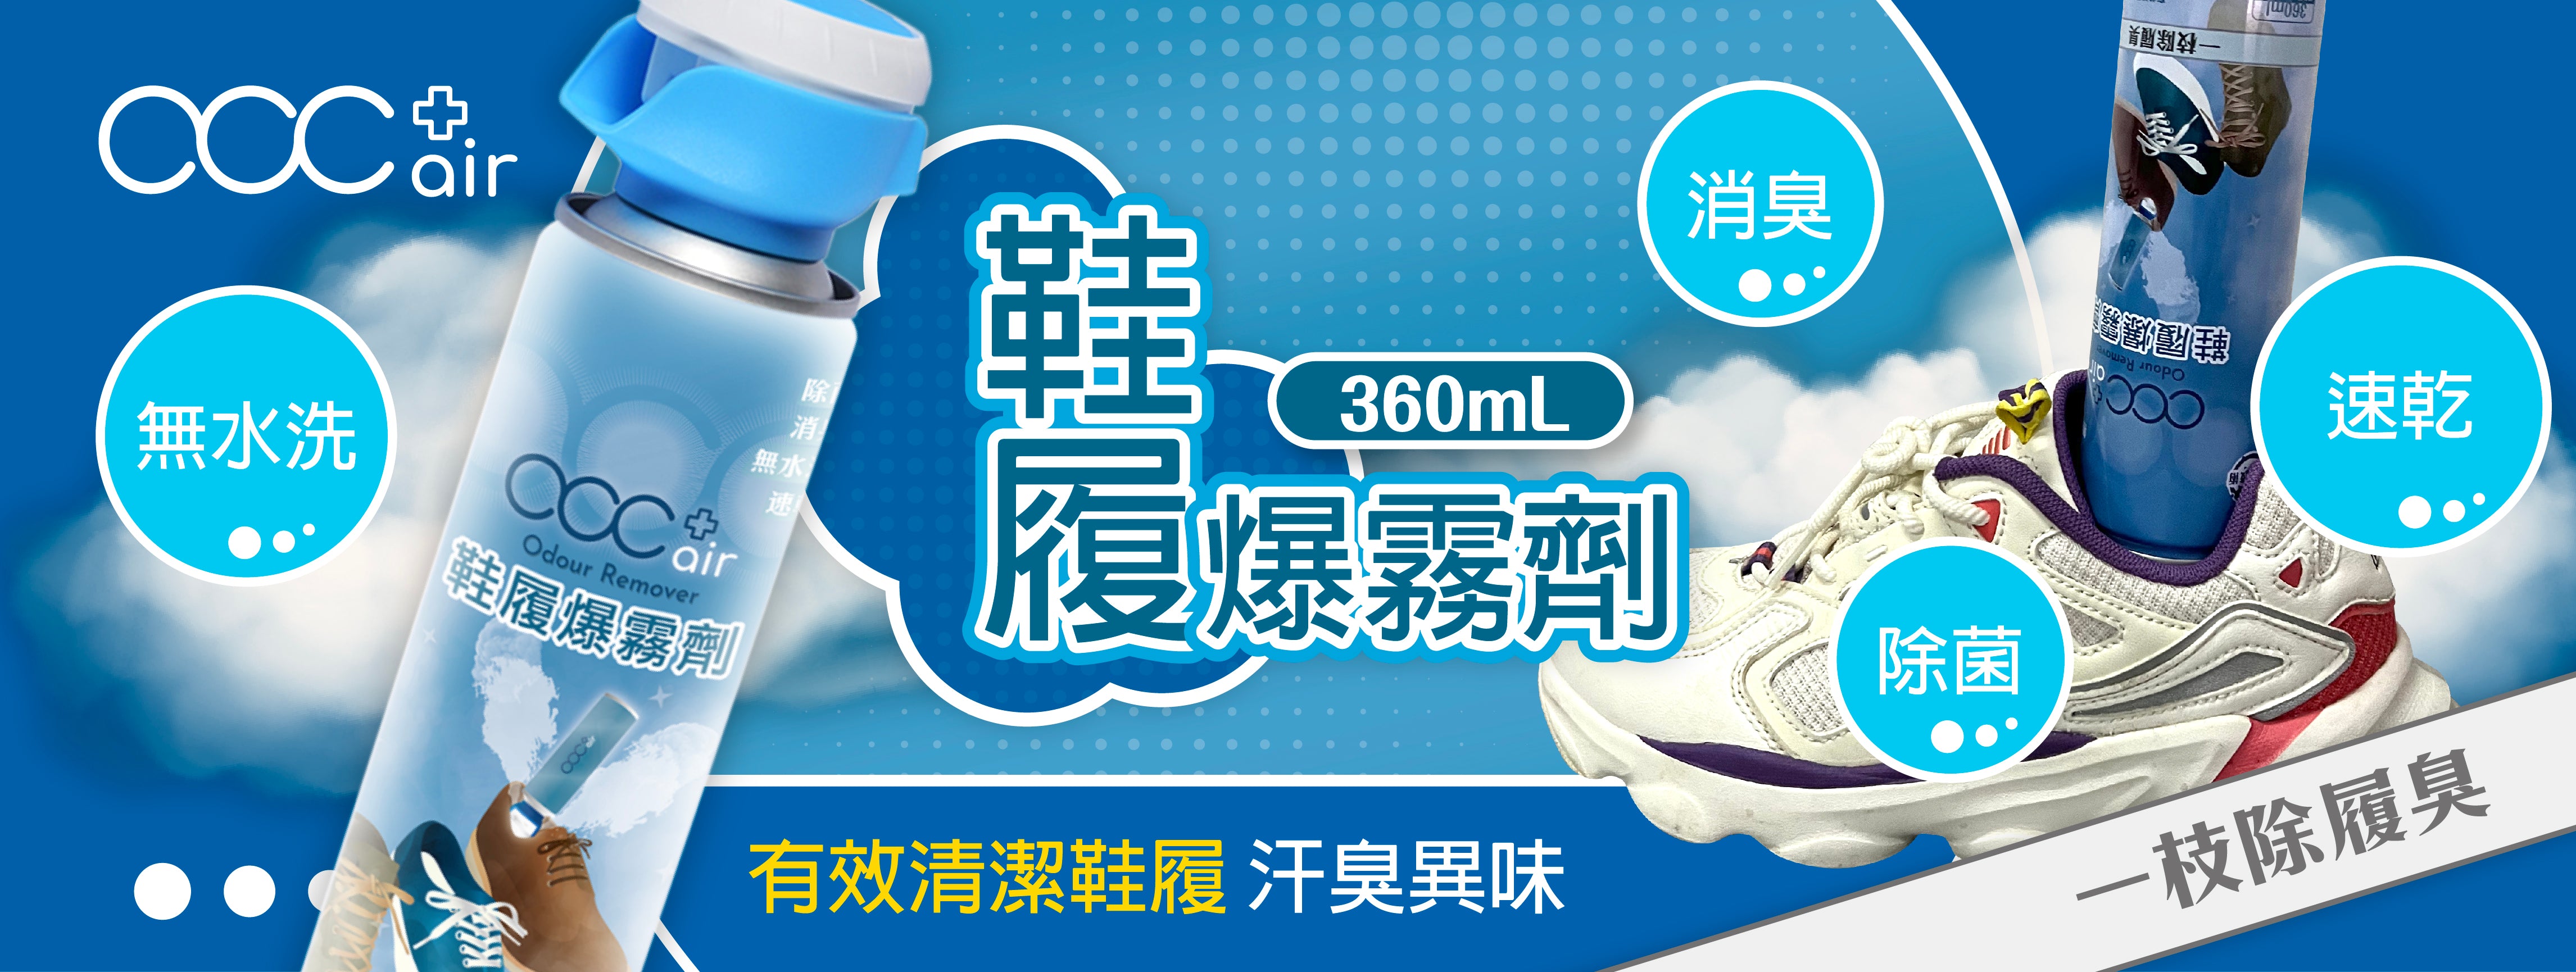 acc+ air shoe blasting agent is available in Japantown/Abutai/HKTVmall, effective deodorizing one stick deodorizing shoes